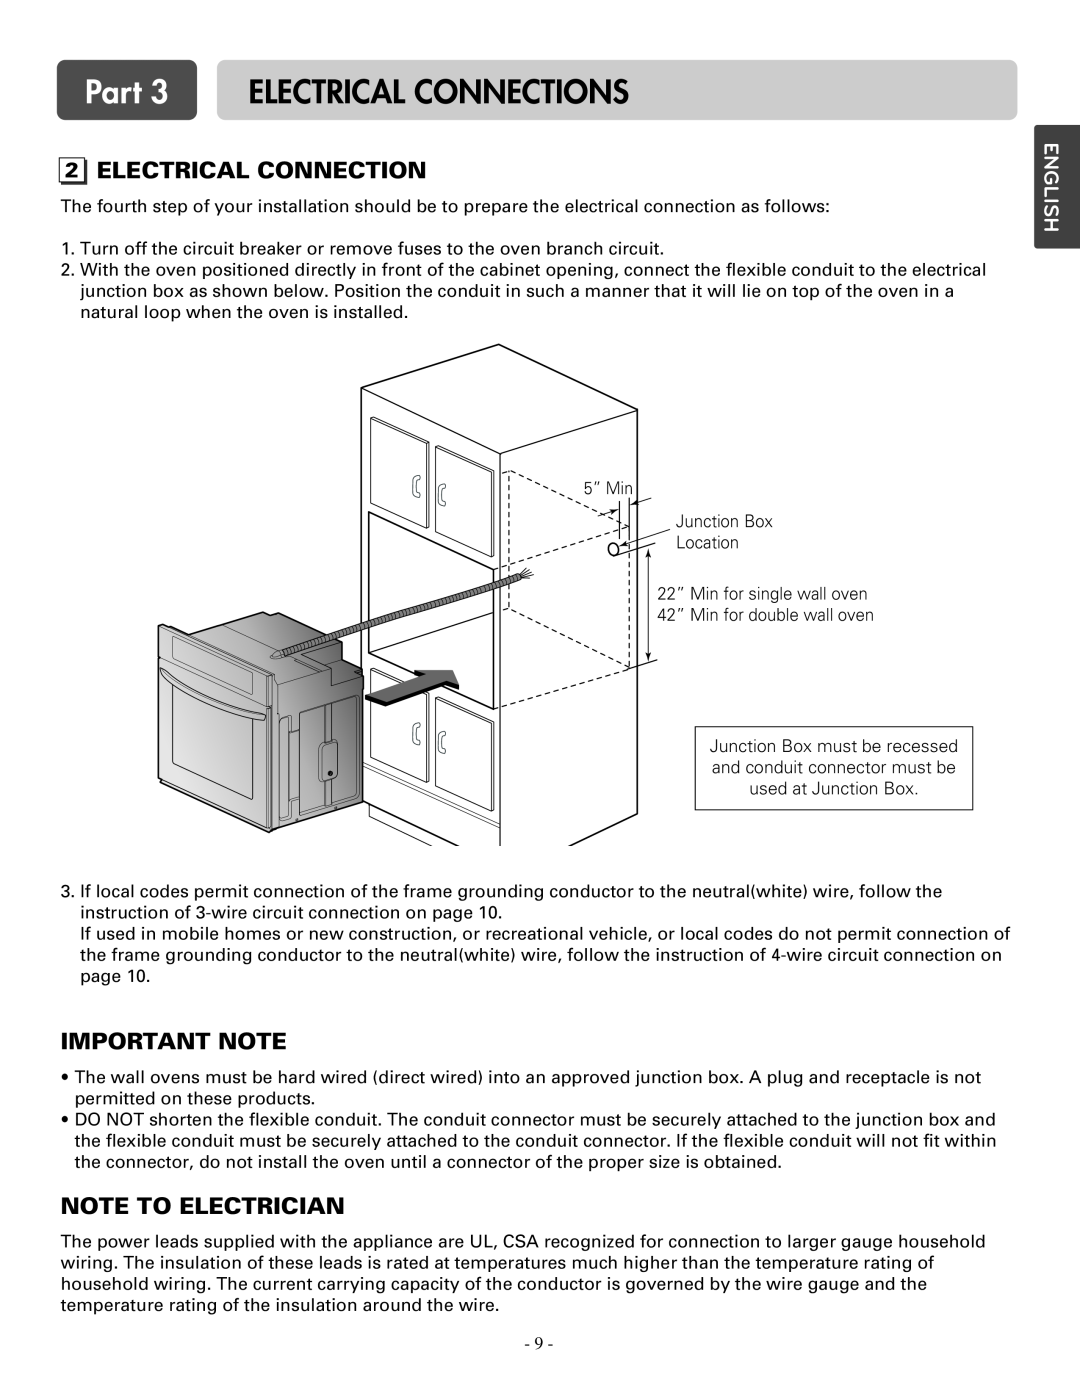 LG Electronics LWD3081ST Electrical Connection, Note To Electrician, Part 3 ELECTRICAL CONNECTIONS, Important Note 